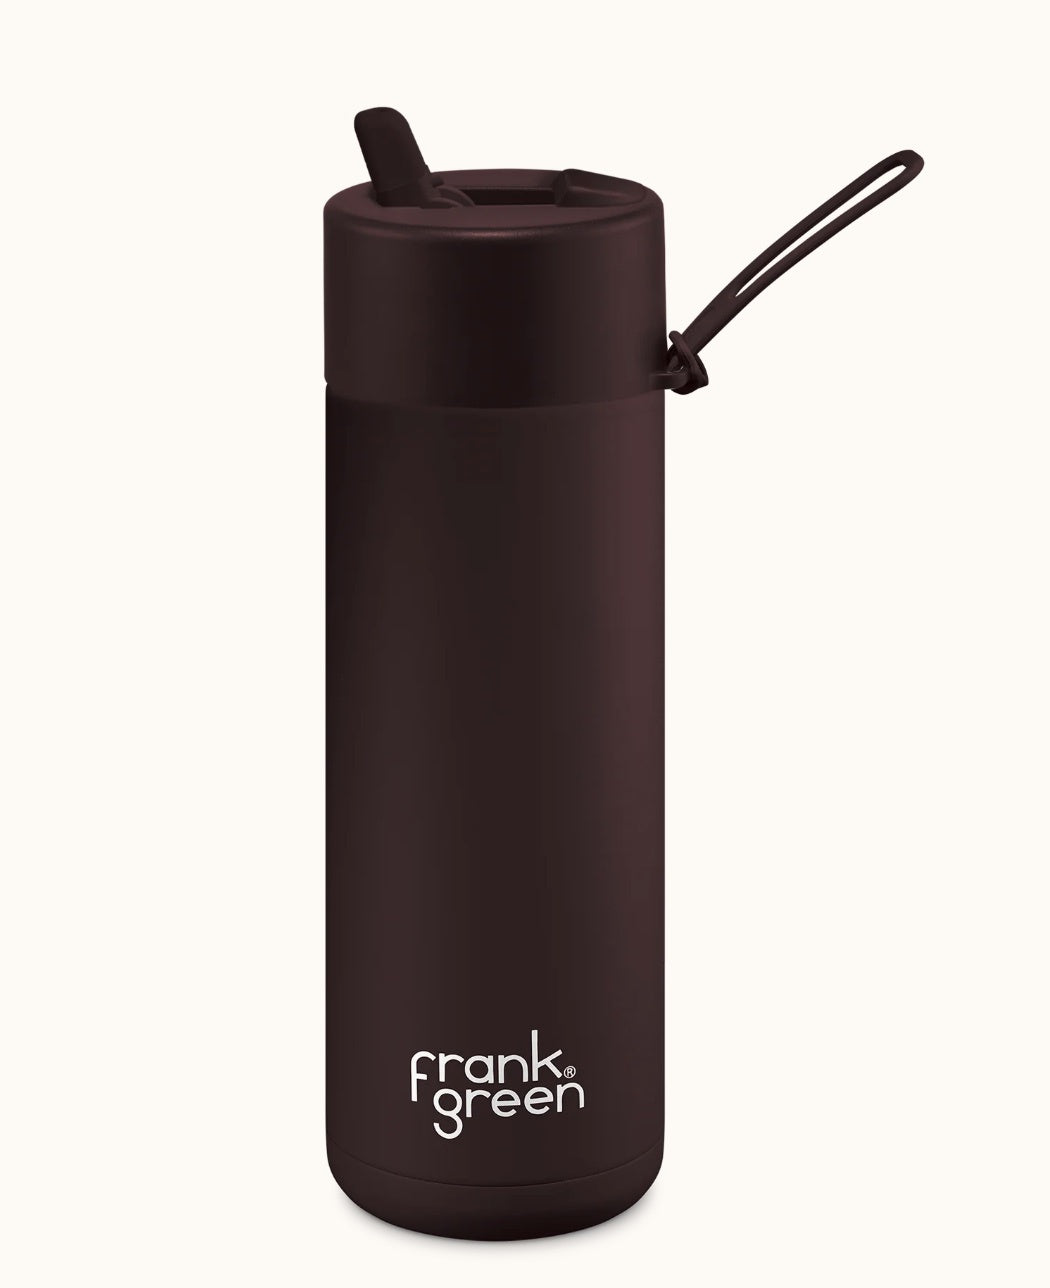 Limited Edition CHOCOLATE 20oz / 595ml Stainless Steel Ceramic Reusable Bottle Drink Bottles Frank Green   